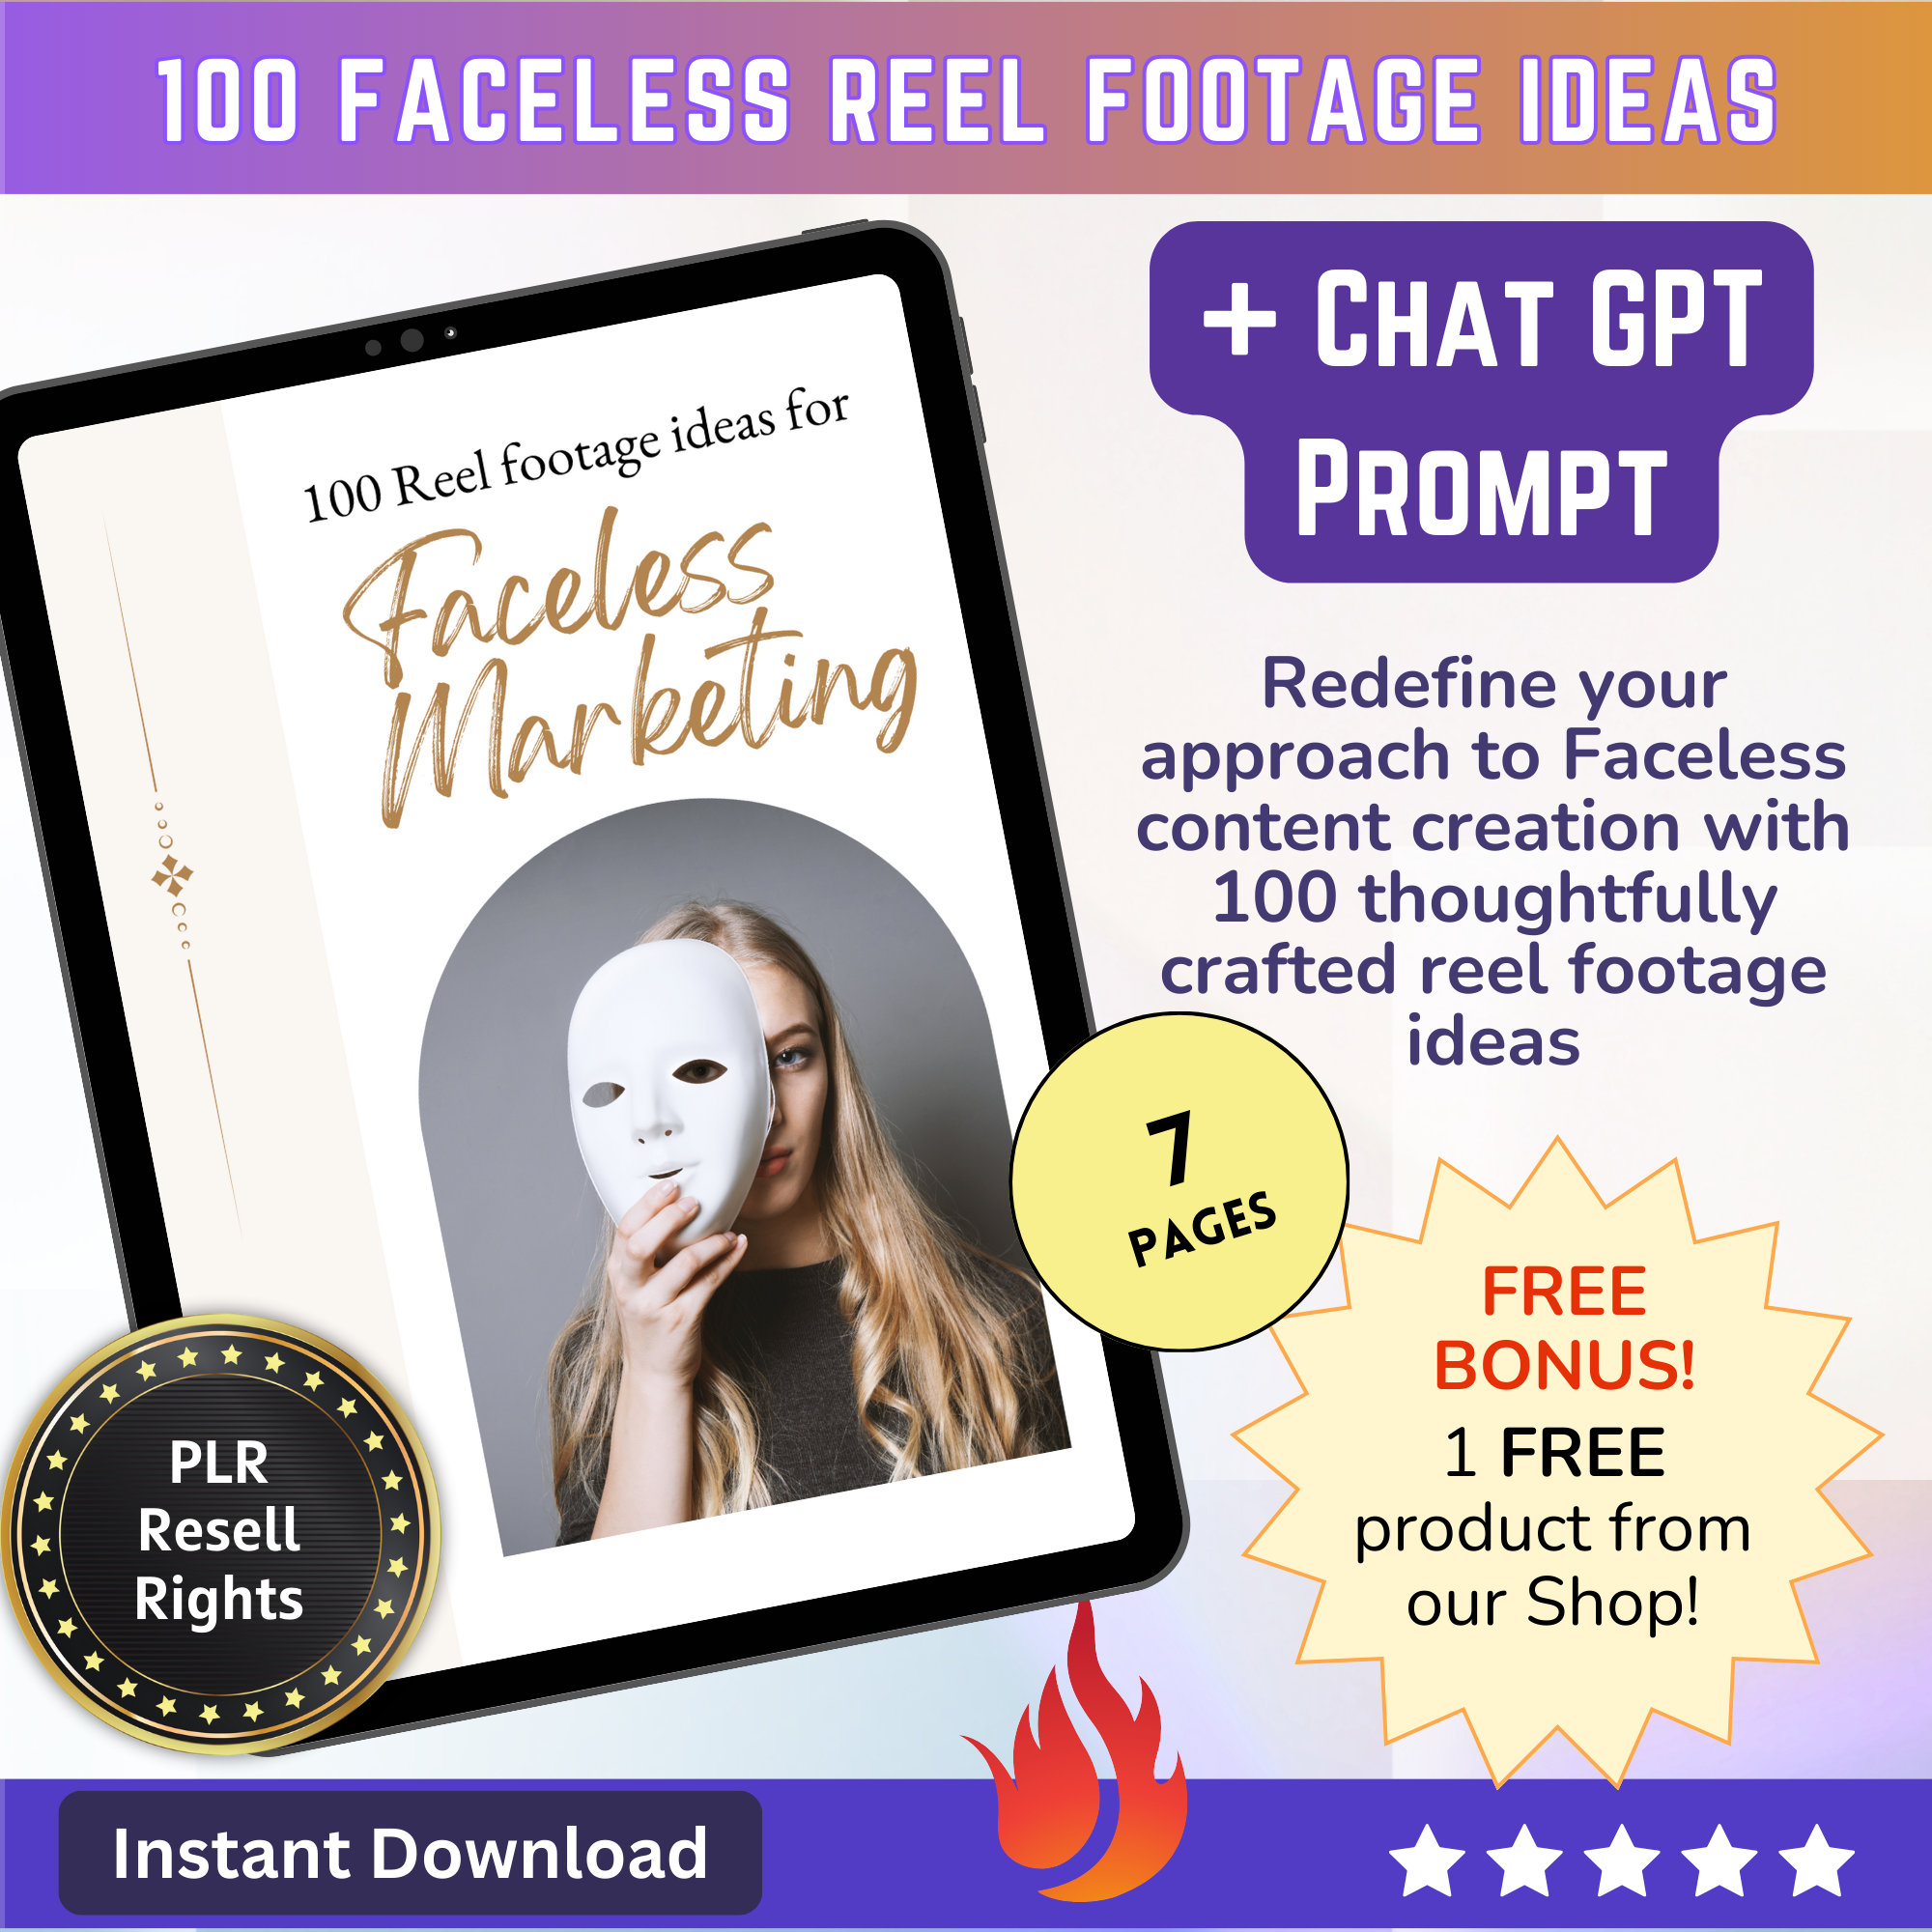 100 Faceless Instagram Reel Footage Ideas mini-EBook + Chat GPT Prompt PLR:  Anonymous Marketing + Faceless Reel ideas - Digital Creators Vault Digital  Products with MRR Master resell rights or PLR private